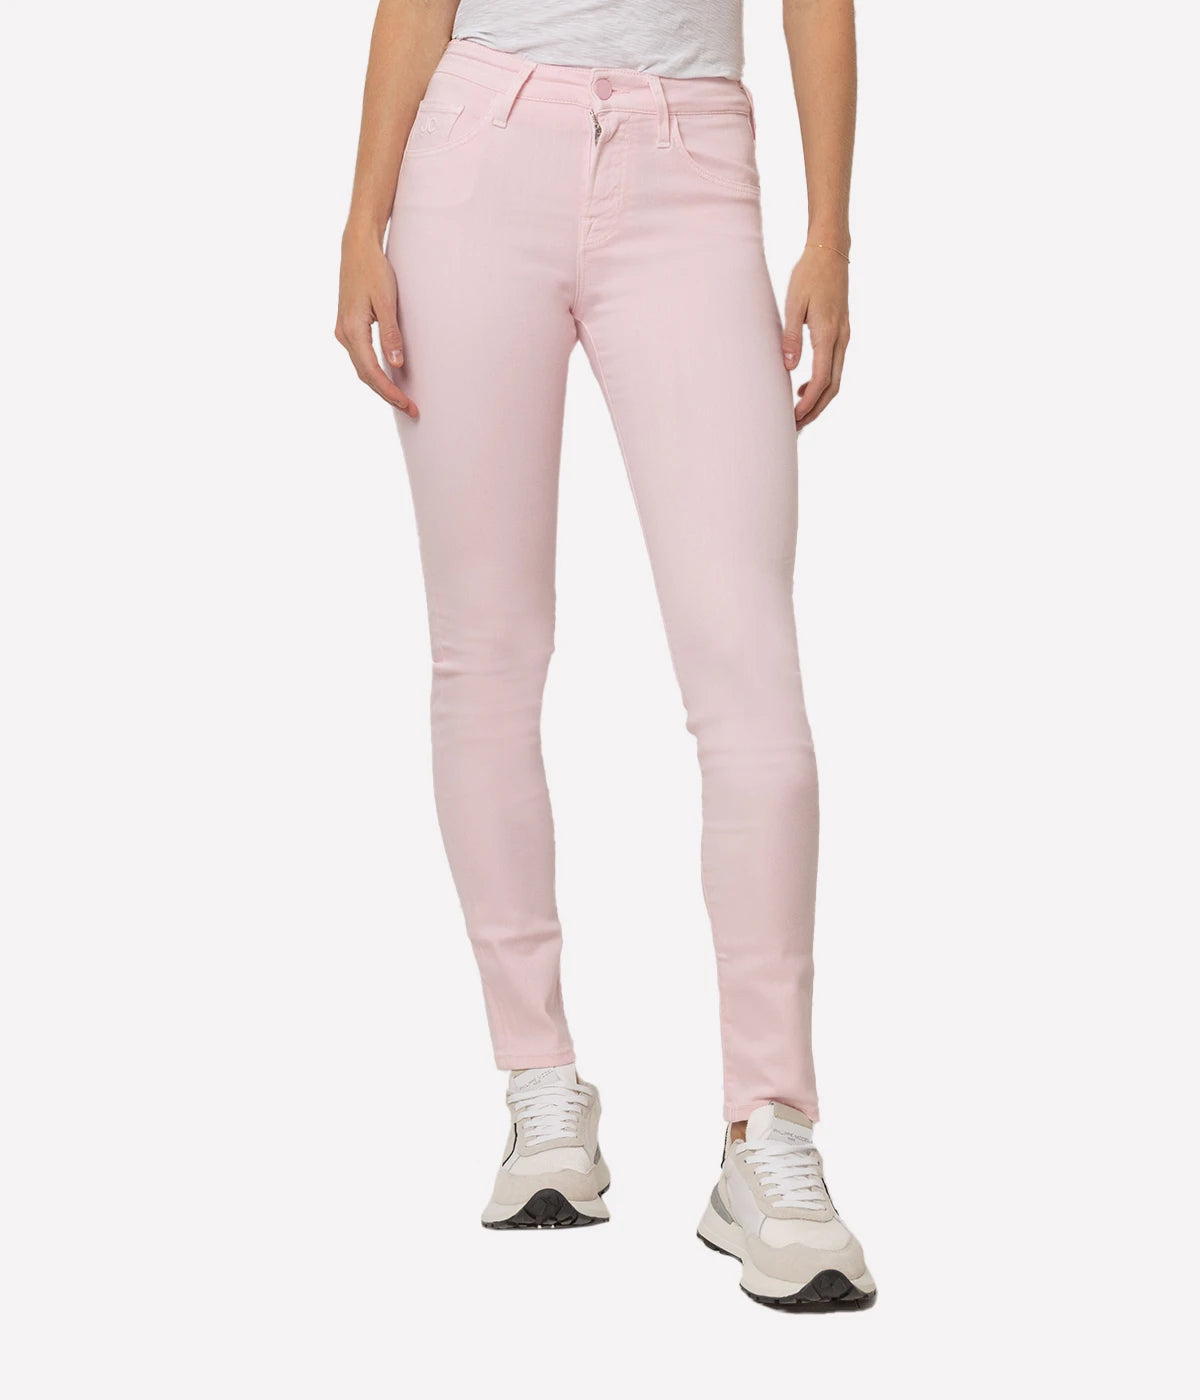 Kimberly Jean in Porcelain Pink